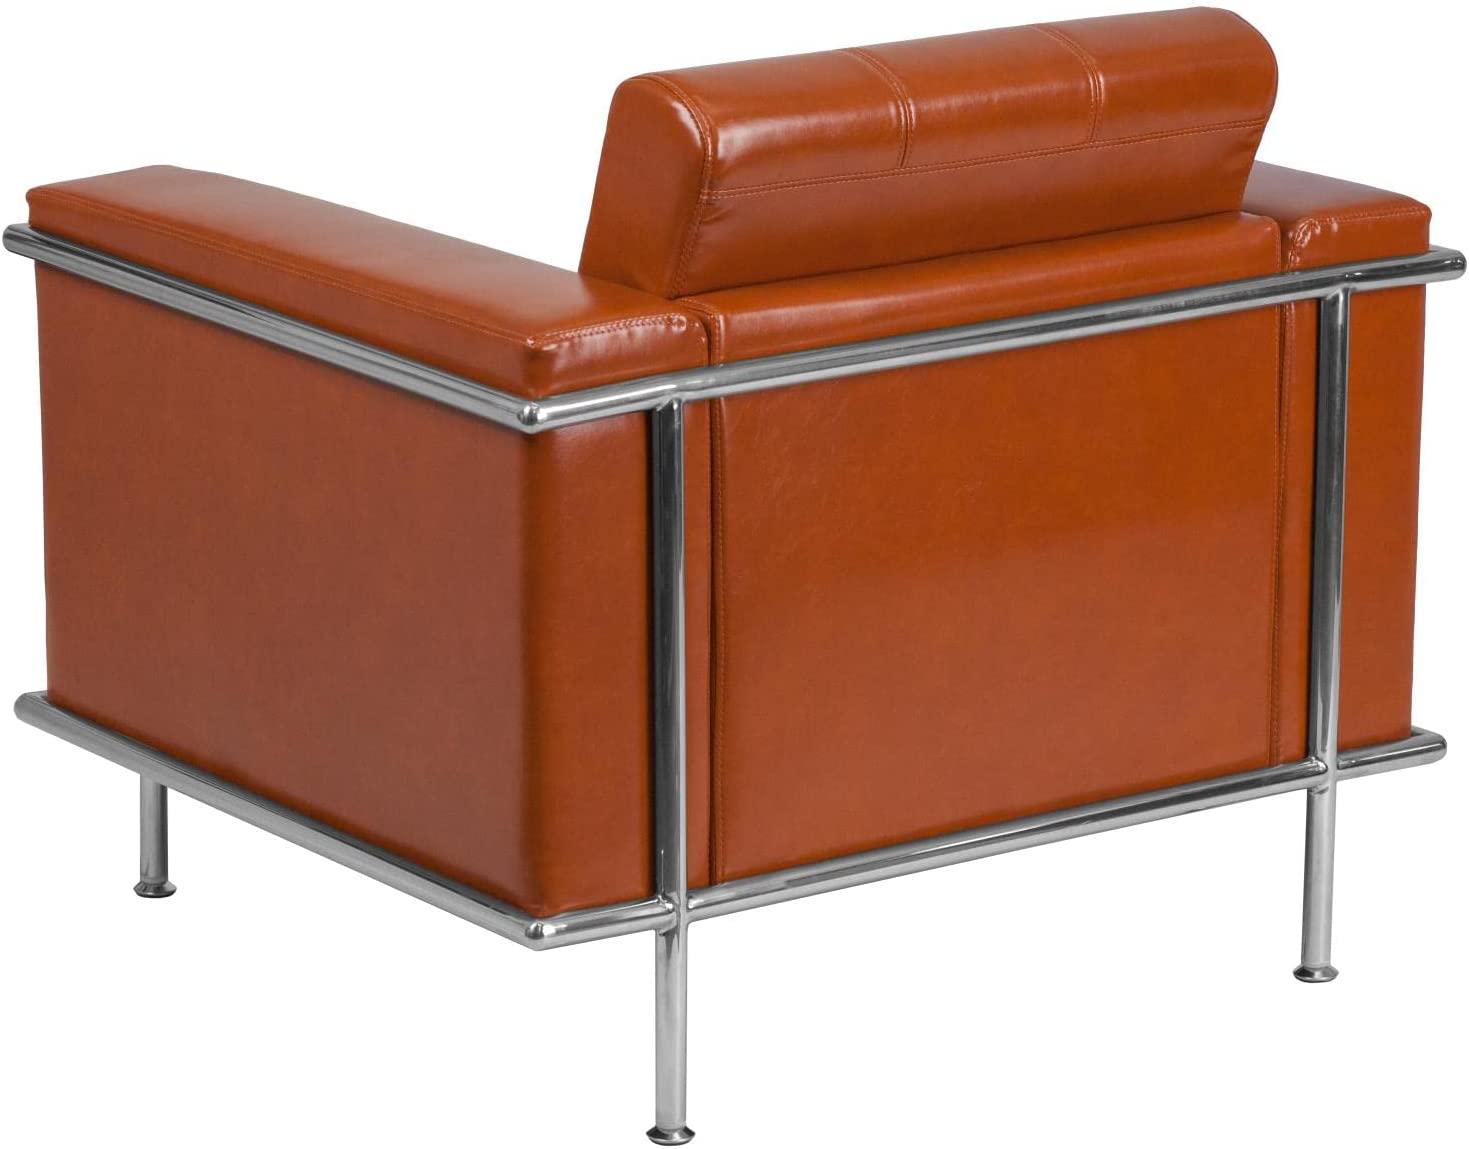 Flash Furniture HERCULES Lesley Series Contemporary Cognac LeatherSoft Chair with Encasing Frame